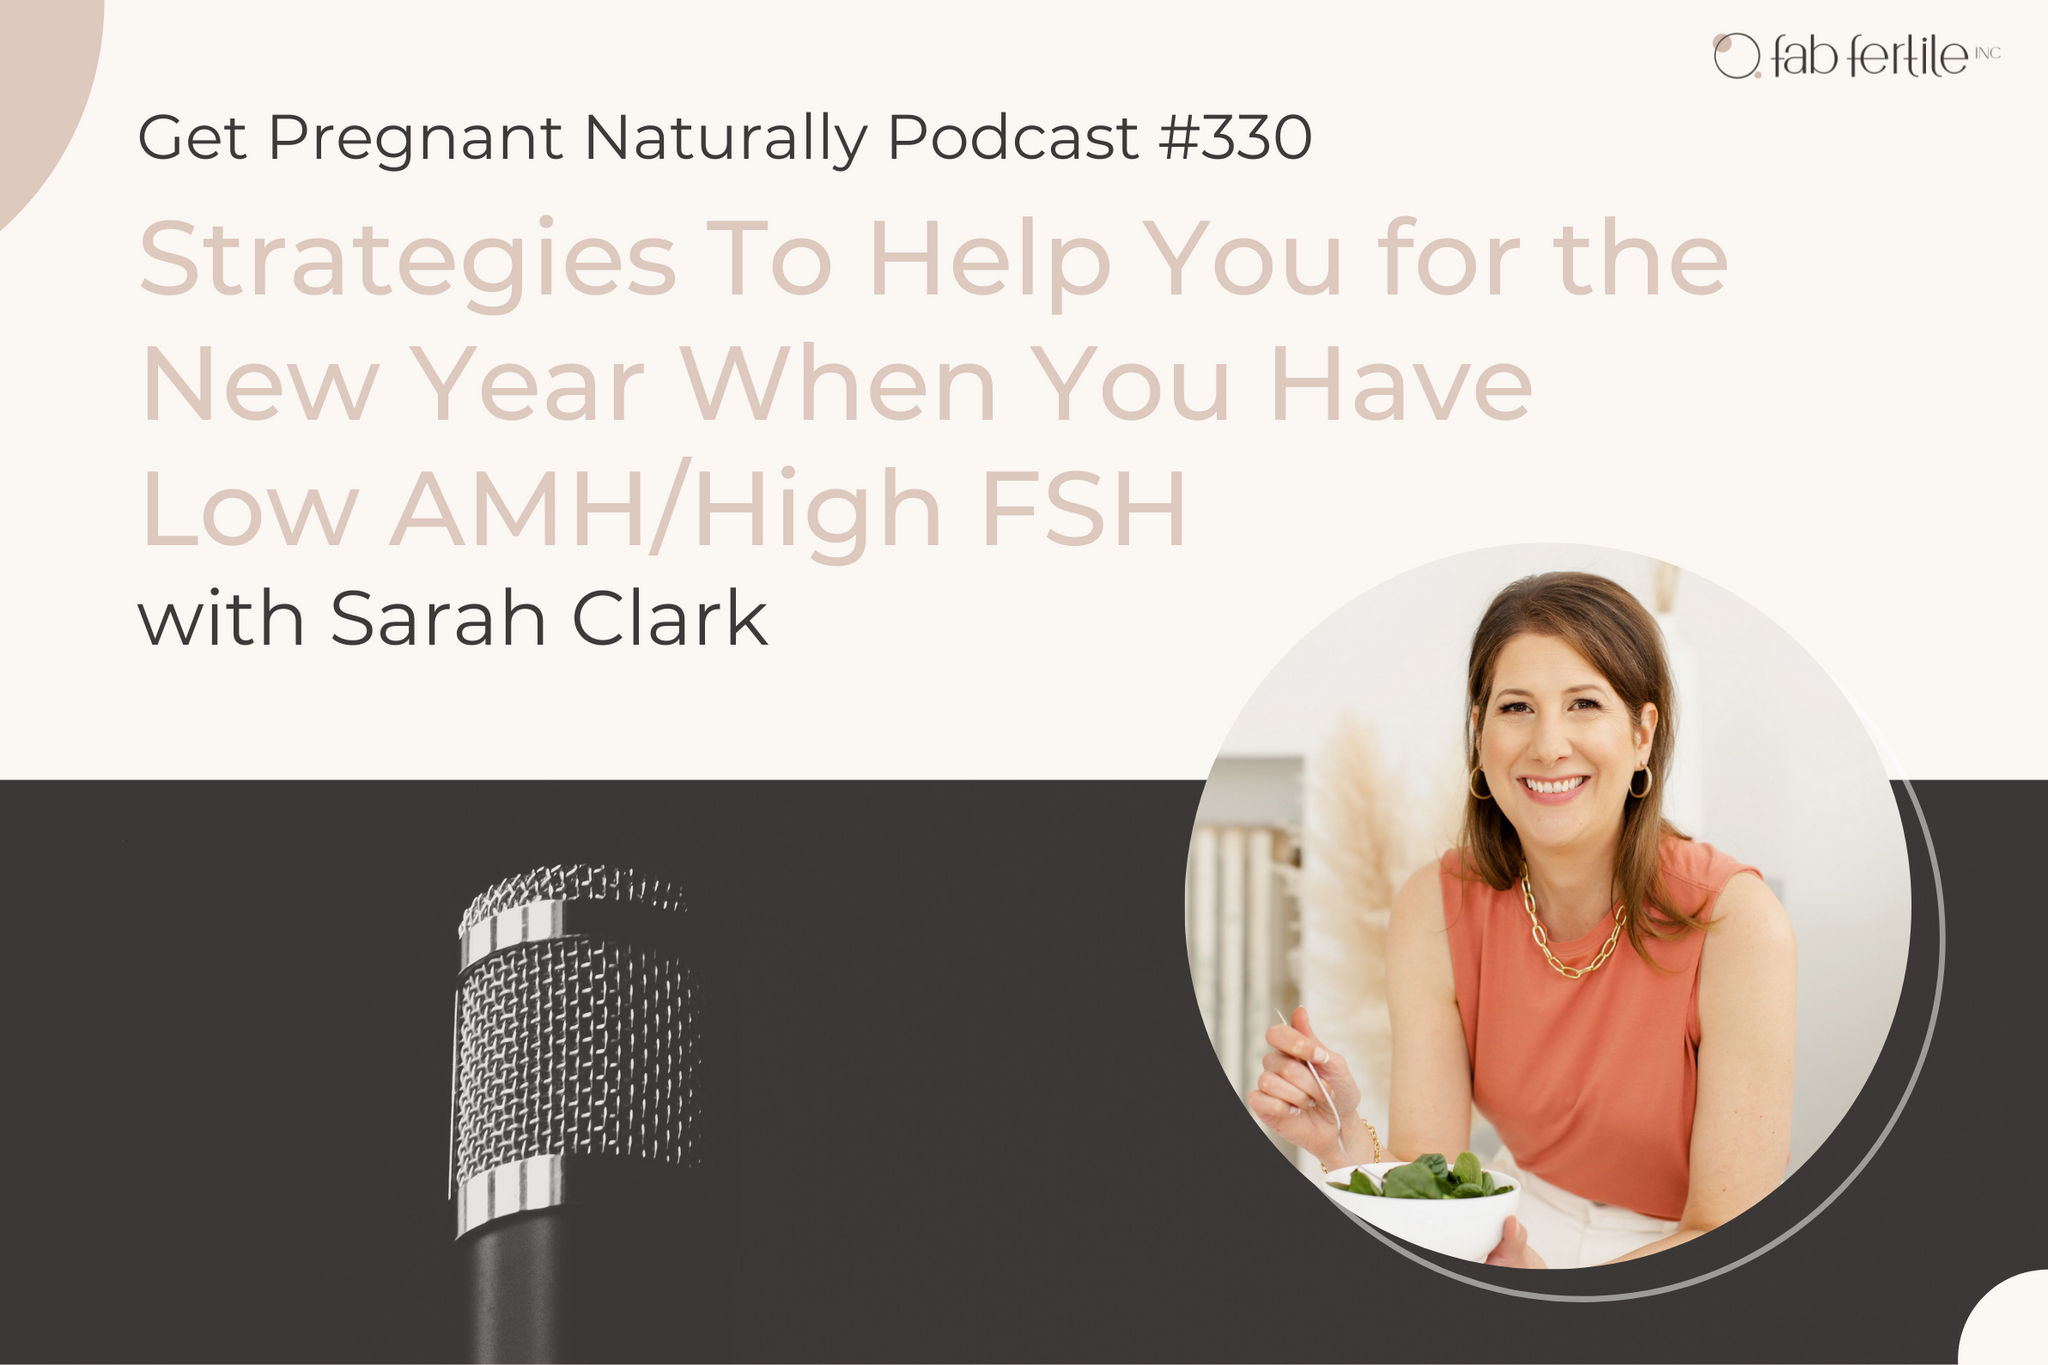 Strategies To Help You For The New Year When You Have Low AMH/High FSH